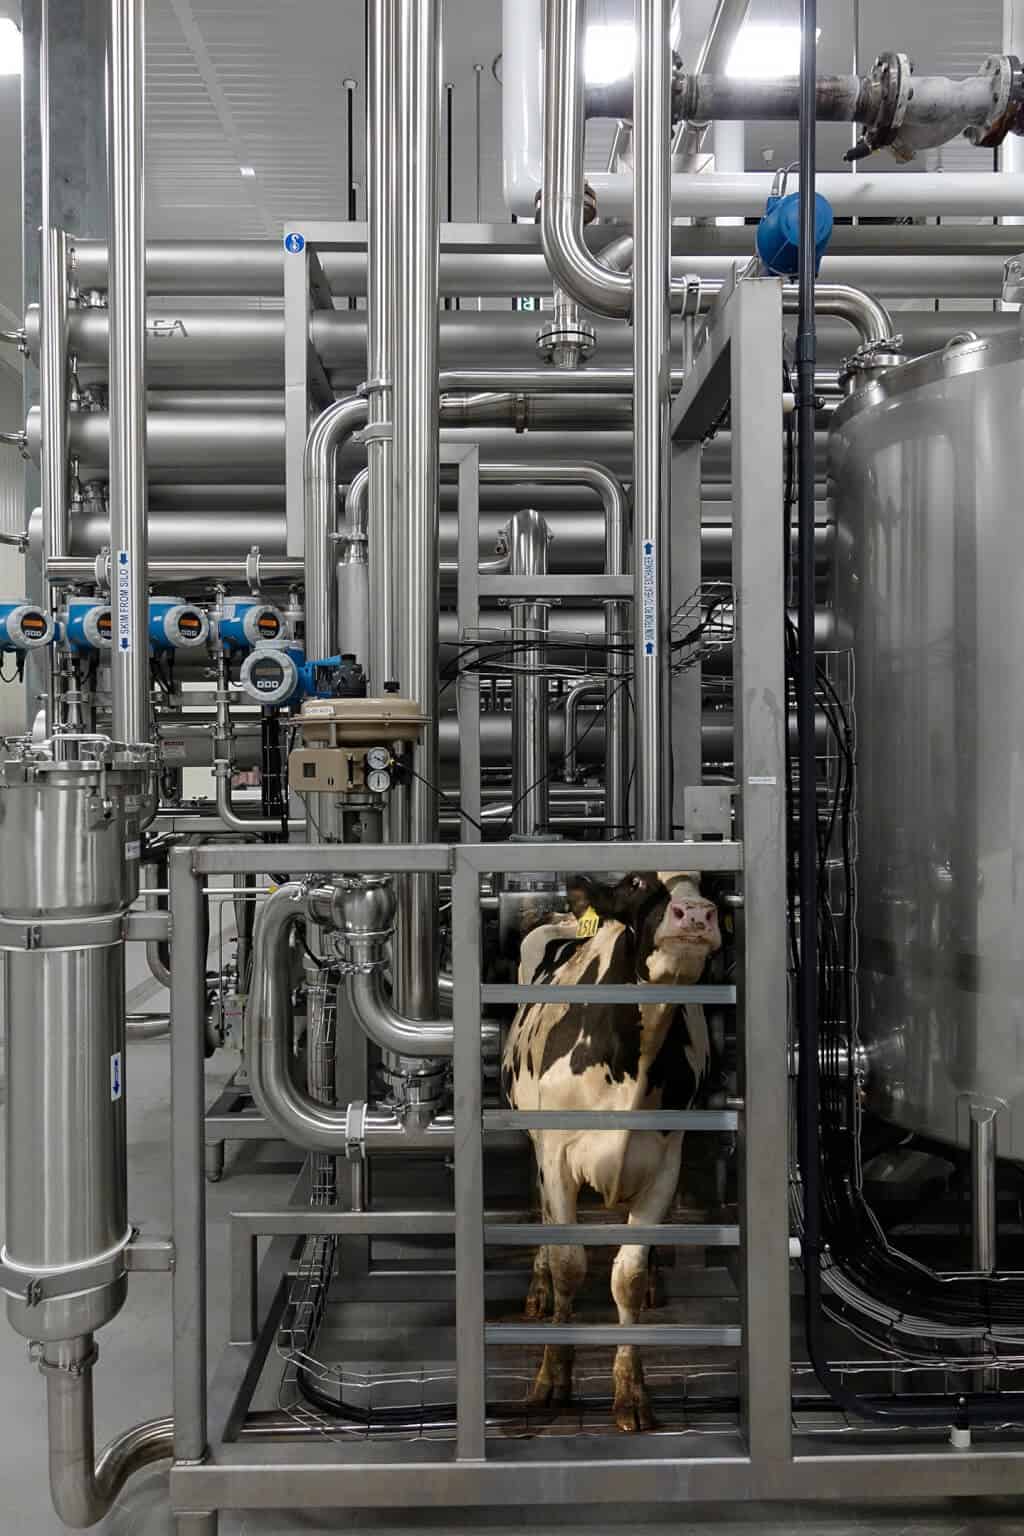 Robin Botie of Ithaca, New York, photoshops a cow trapped in the piping of a dairy products facility.